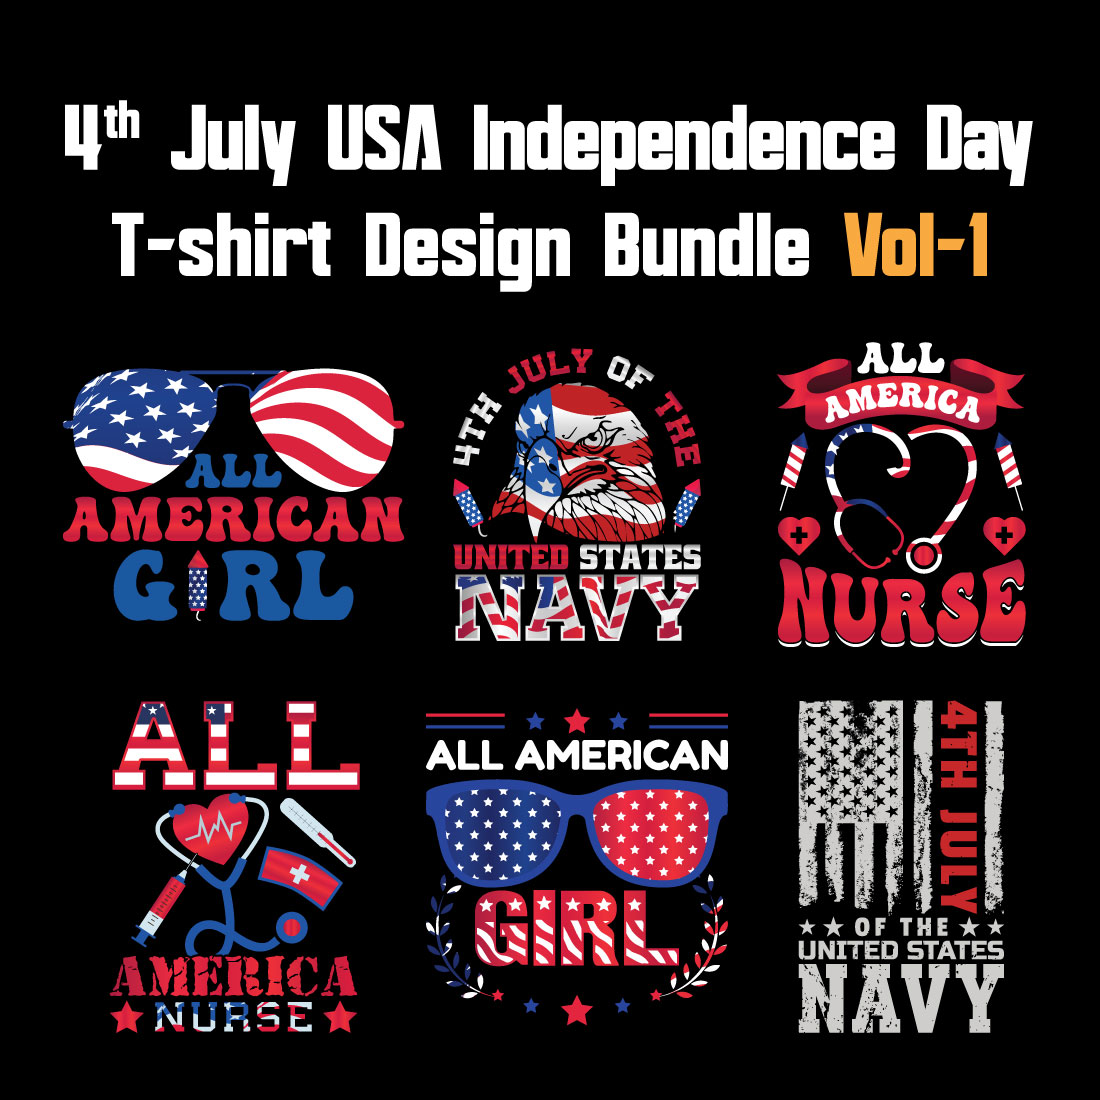 4th July USA independence day T-shirt Design Bundle Vol-1 cover image.